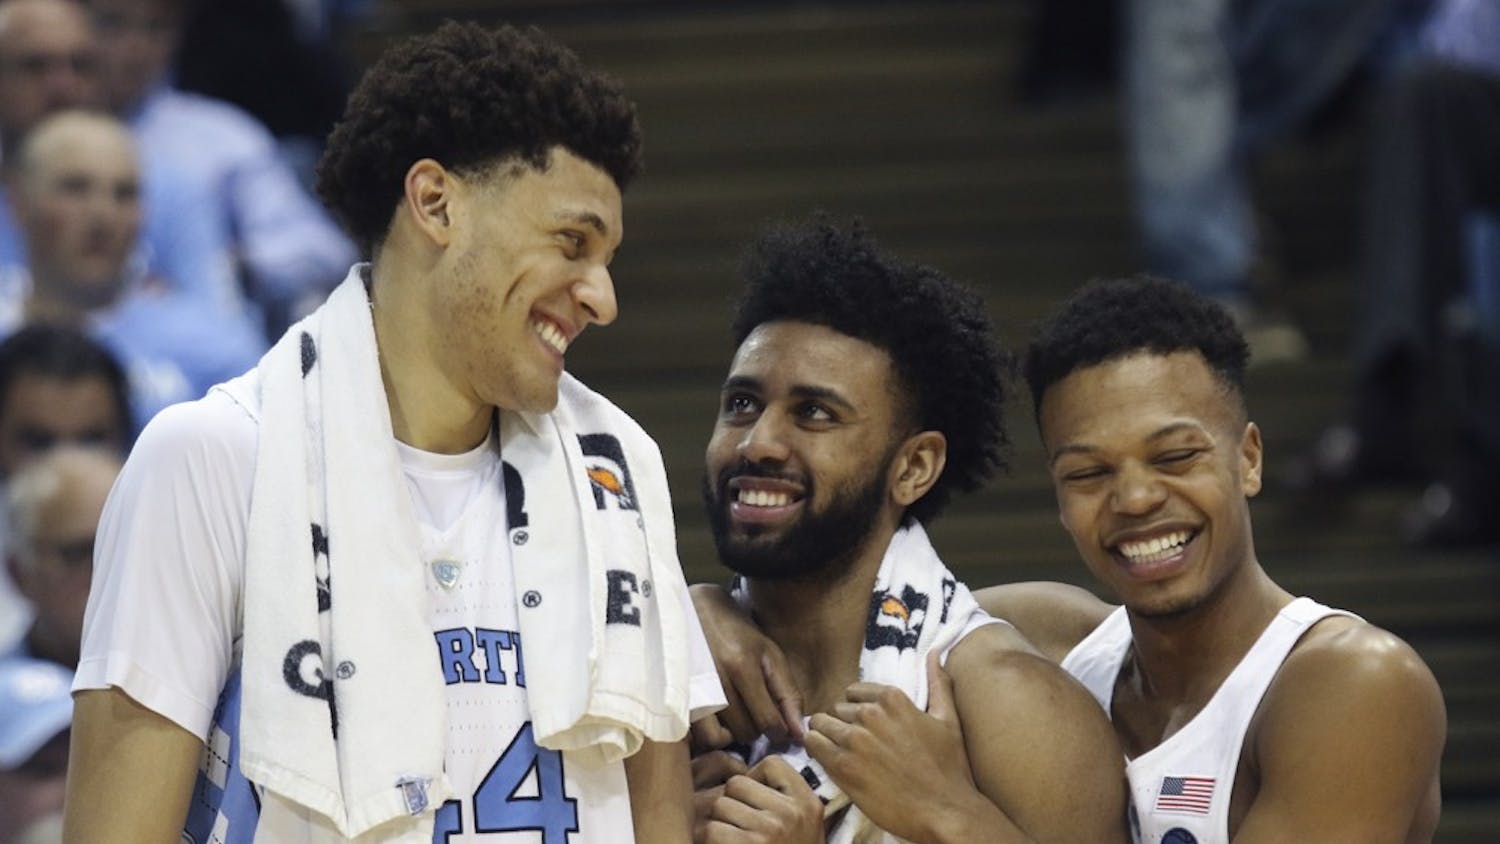 North Carolina wing Justin Jackson (44) has been named the ACC Player of the Year.